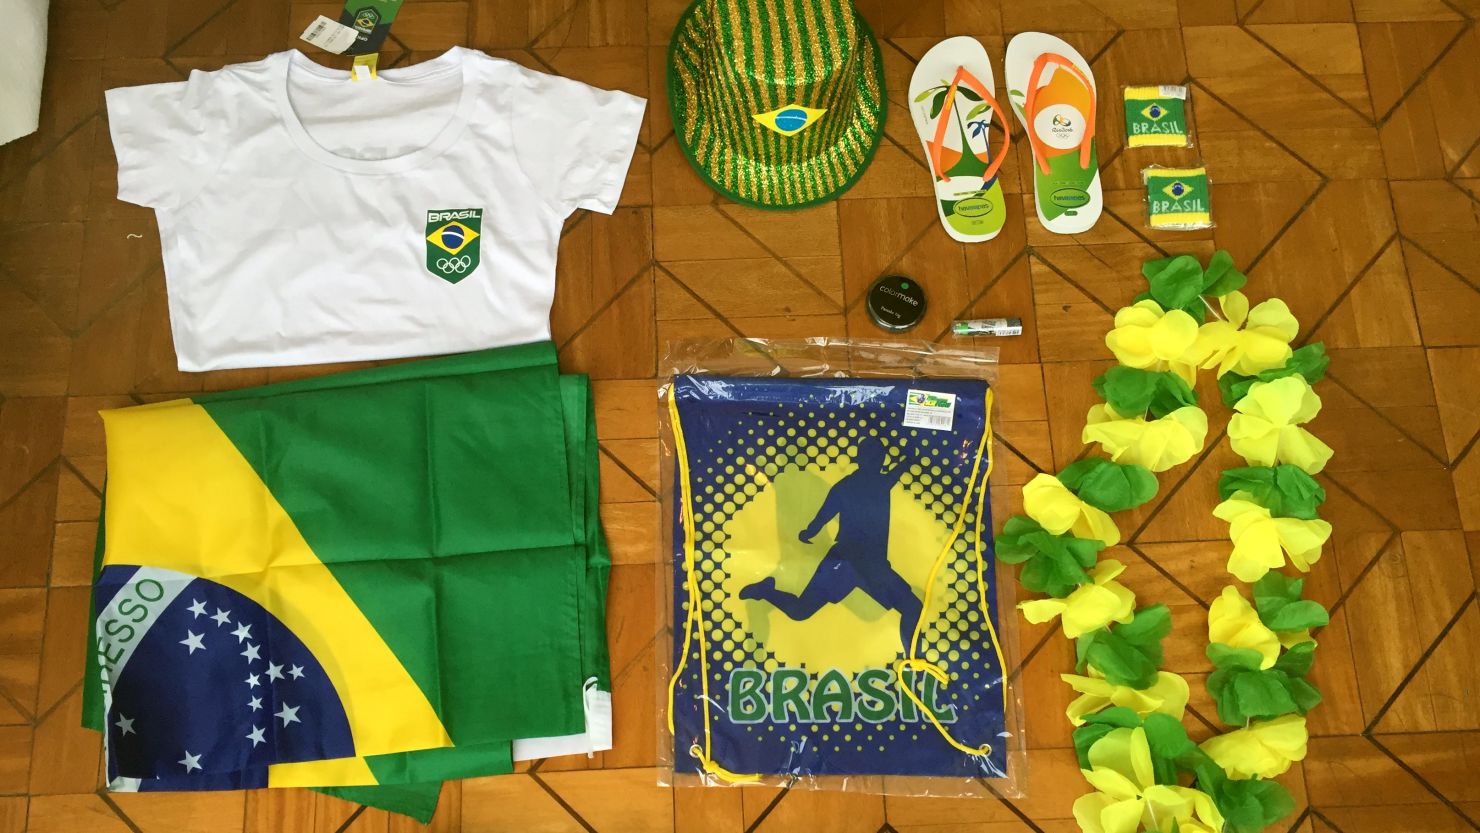 How much does it cost to become a true Brazil fan at the Olympics?